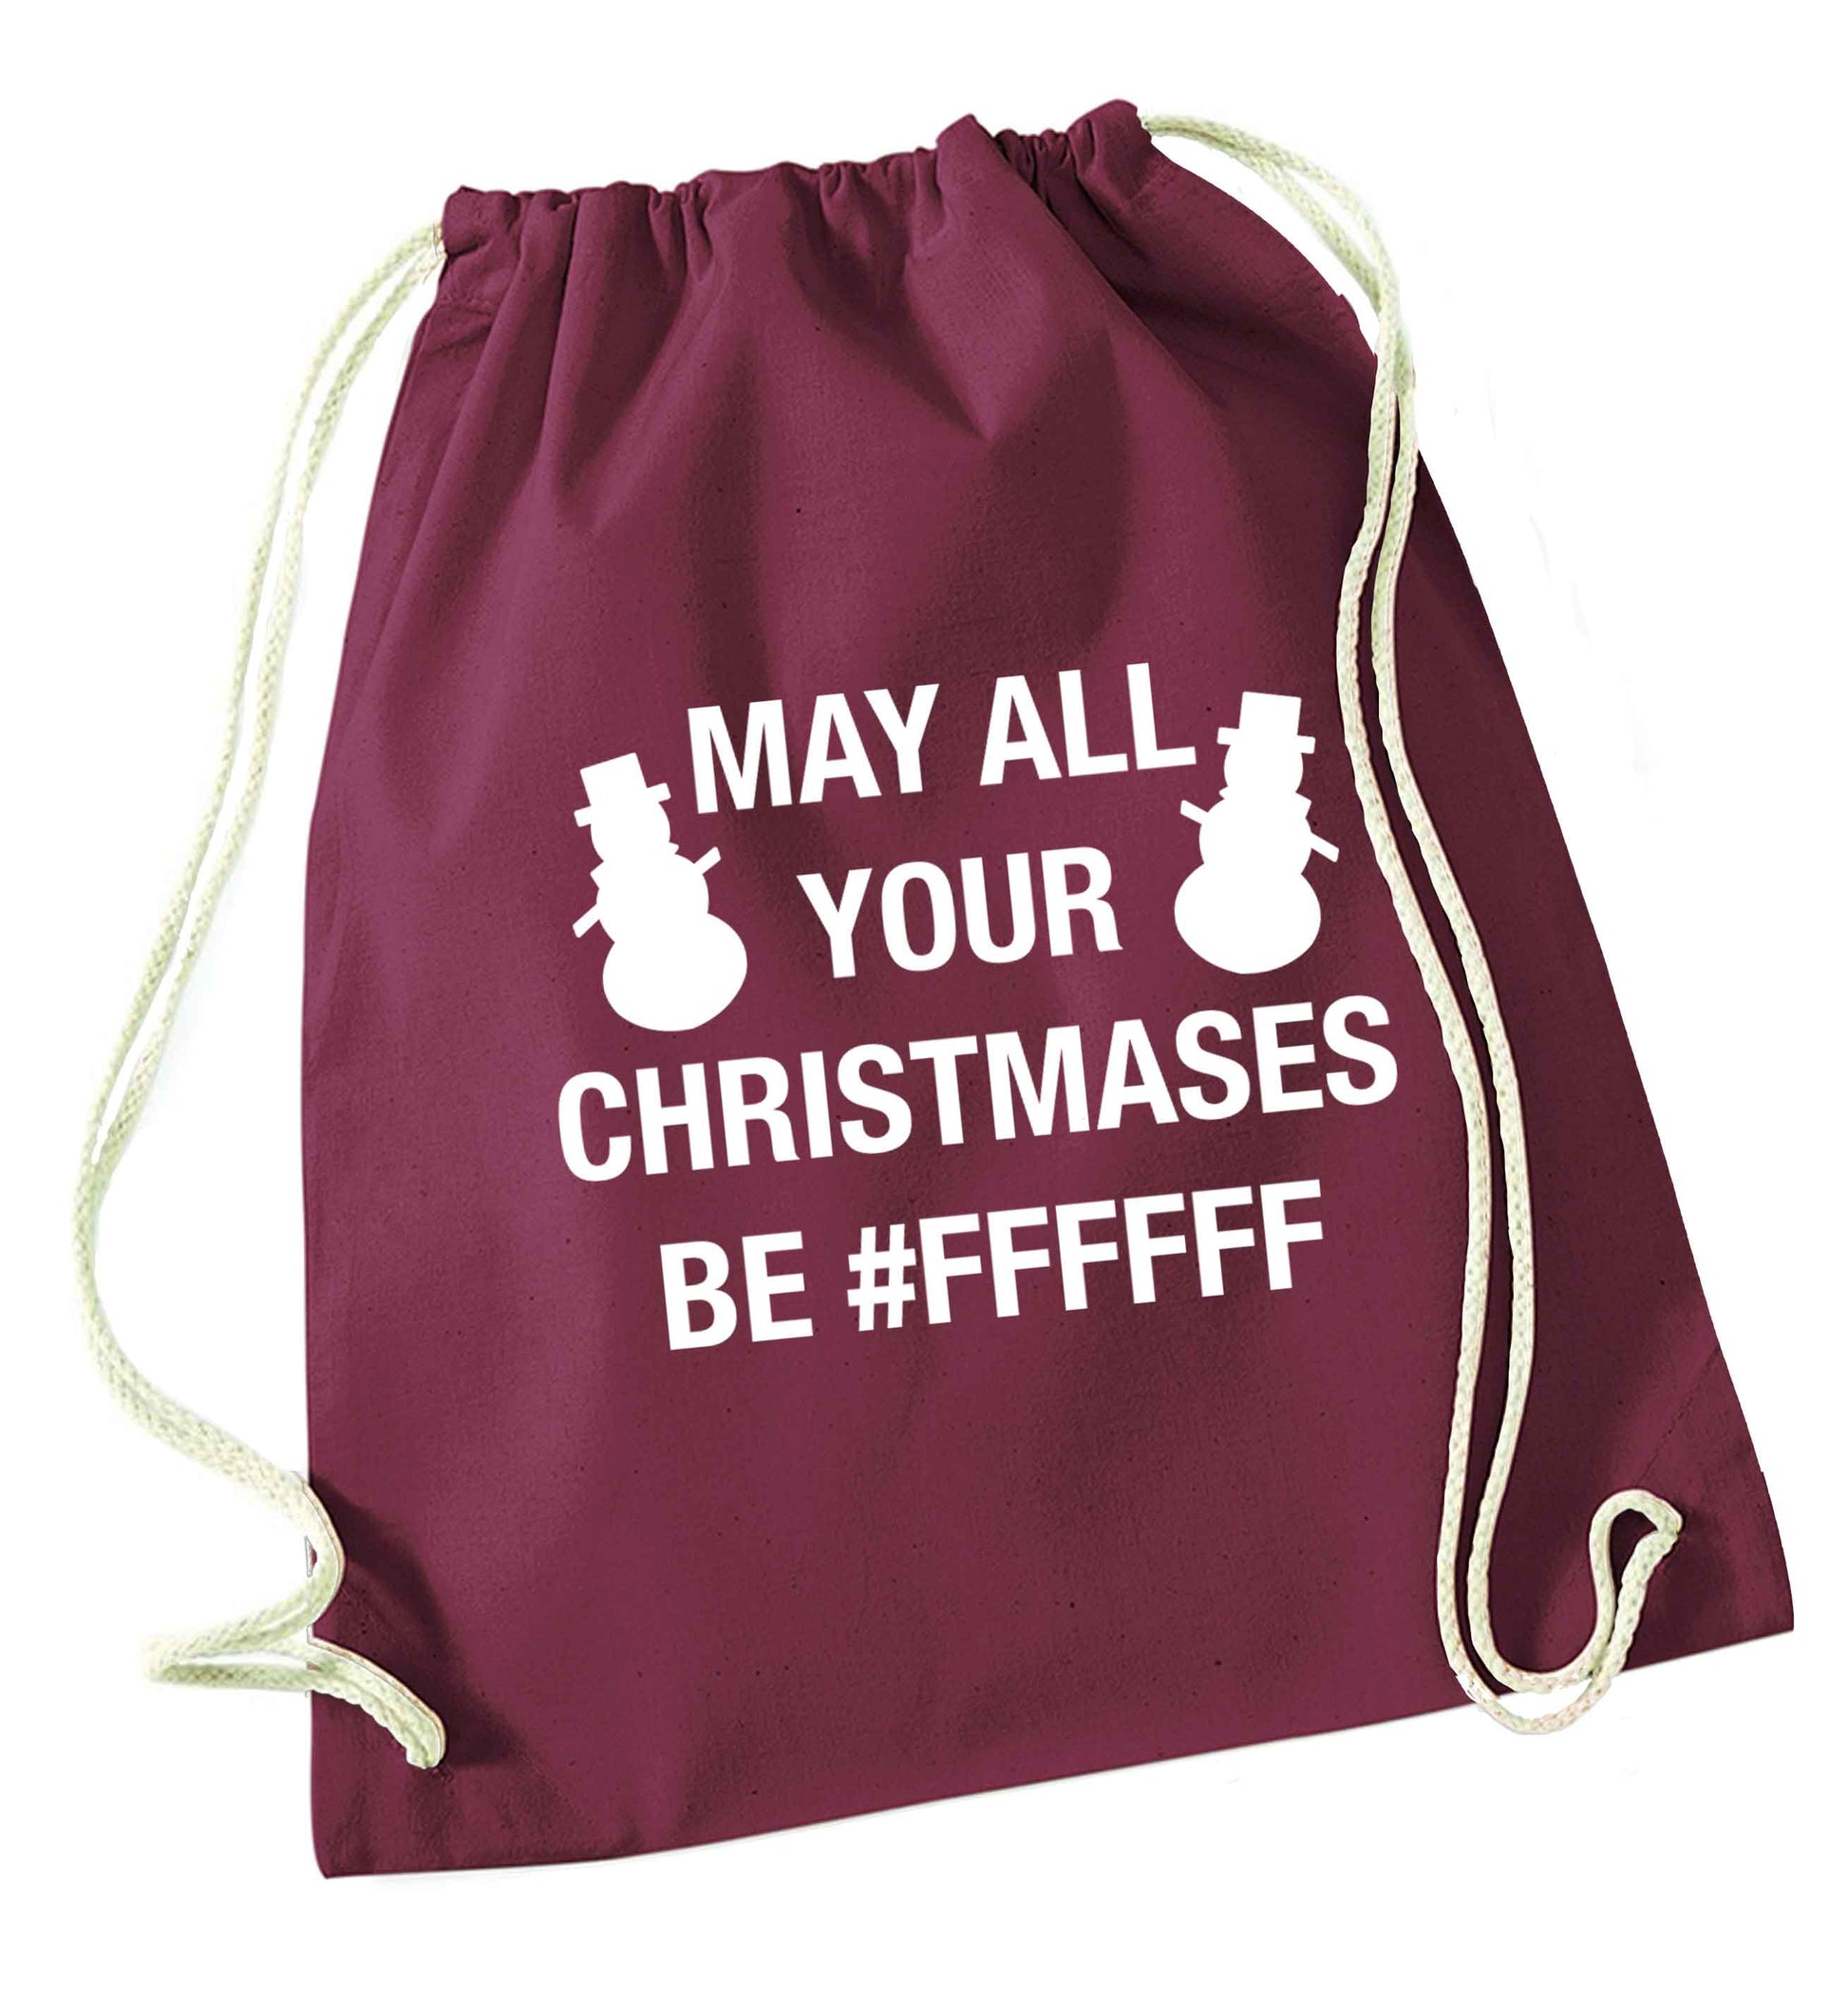 May all your Christmases be #FFFFFF maroon drawstring bag